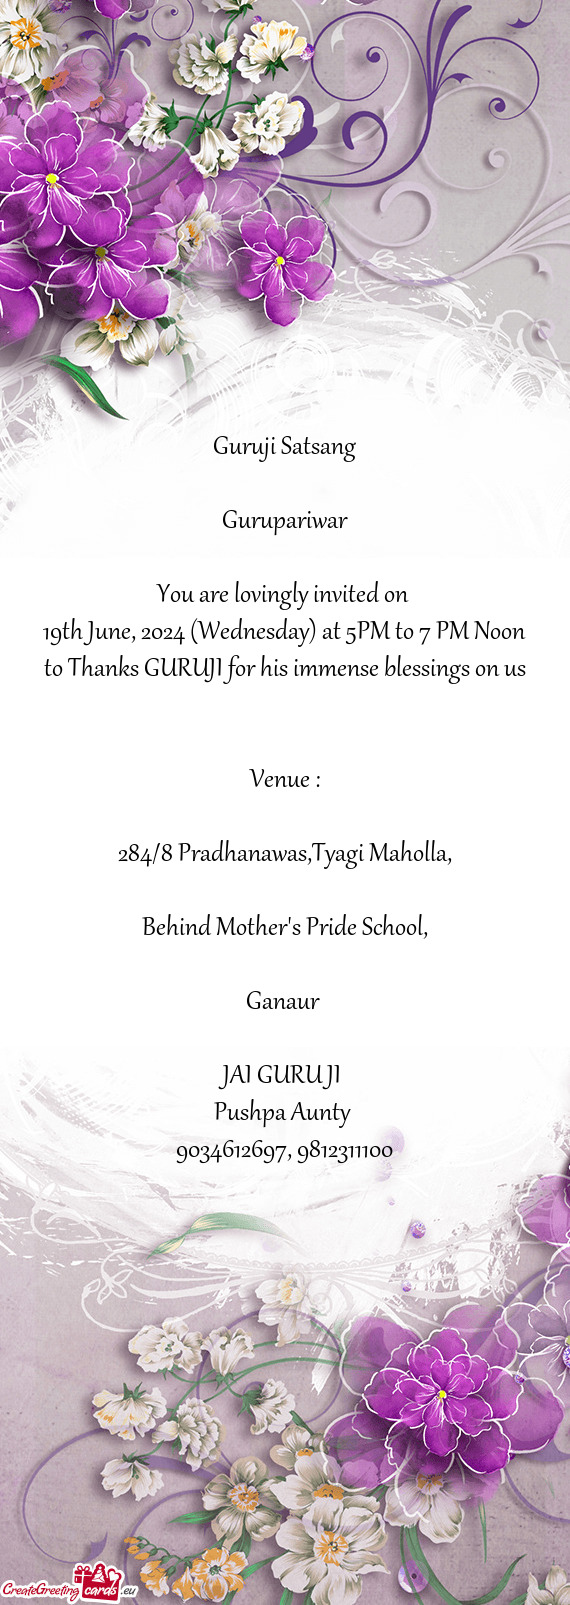 19th June, 2024 (Wednesday) at 5PM to 7 PM Noon